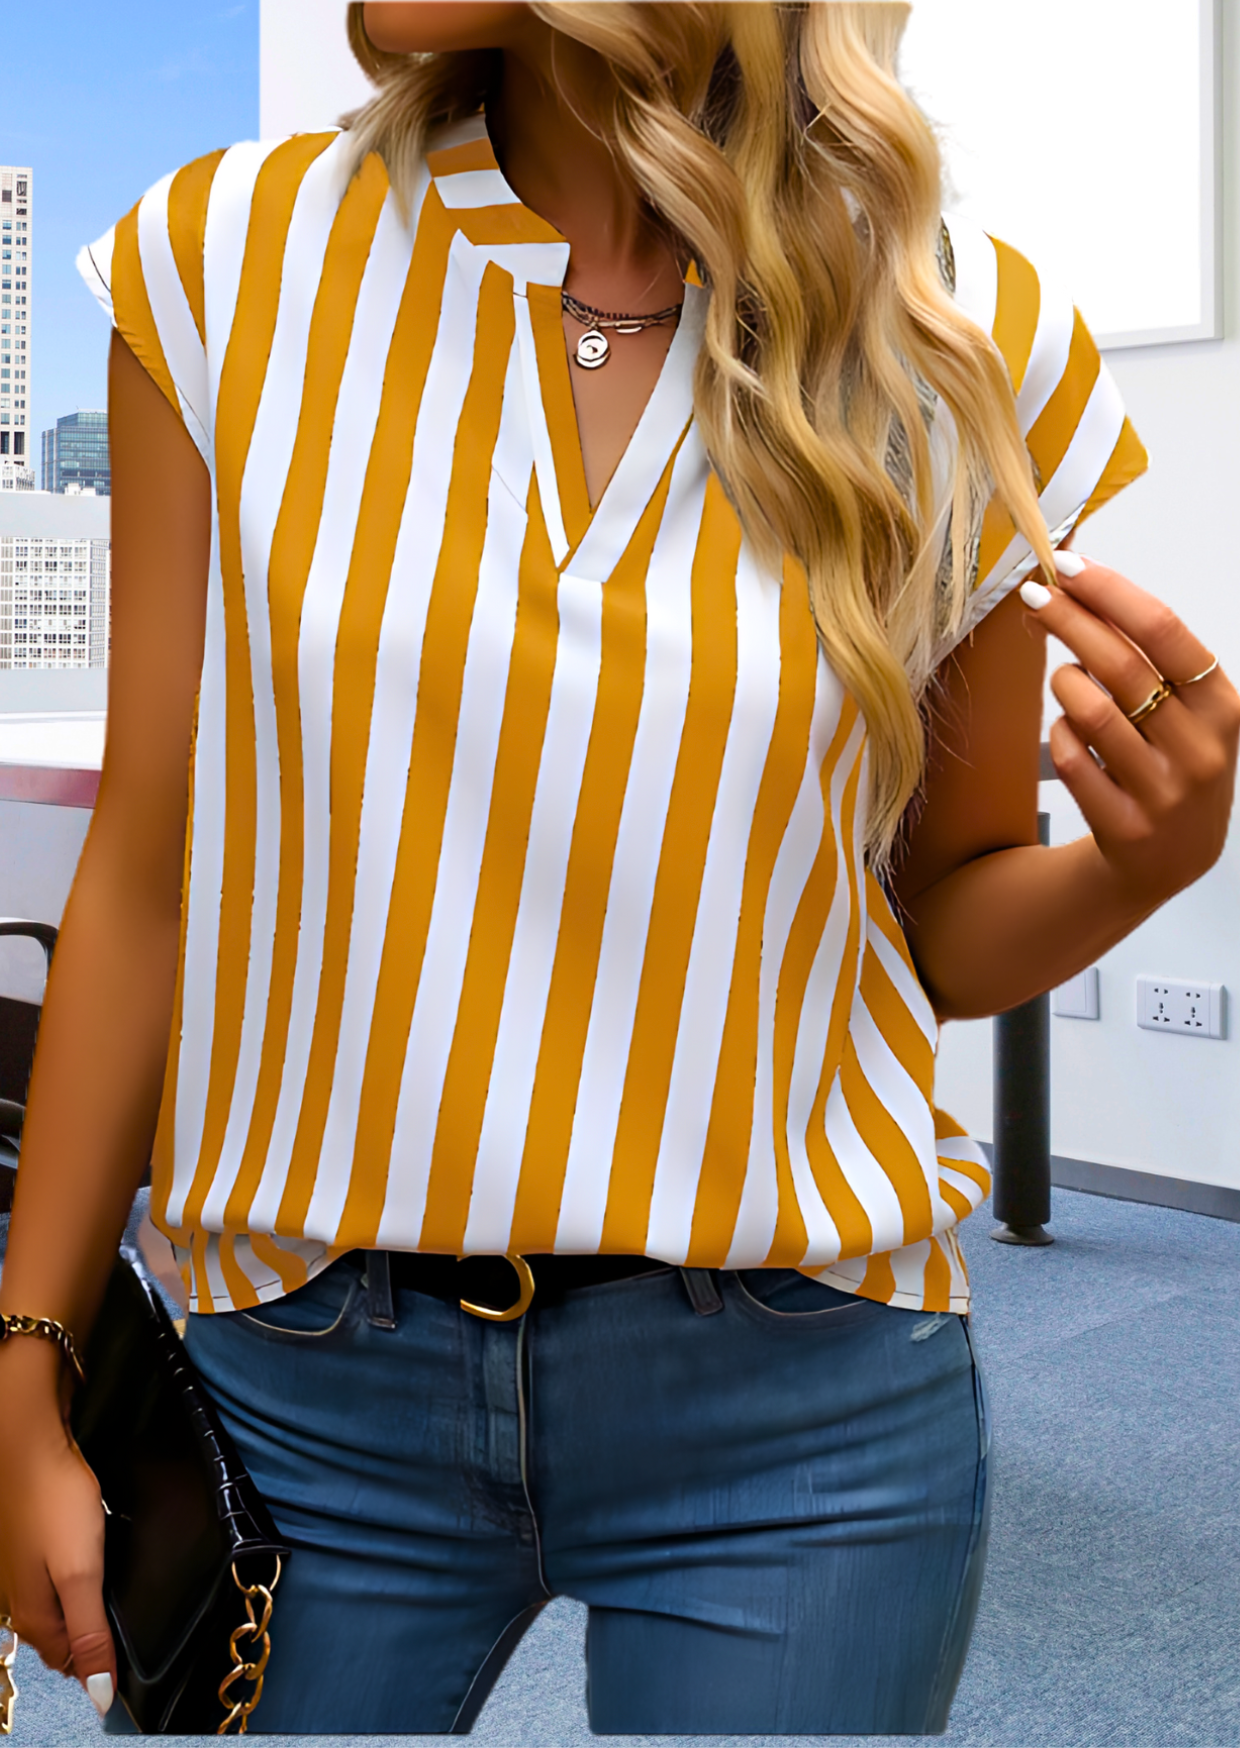 Striped Half Sleeves Shirt for Women